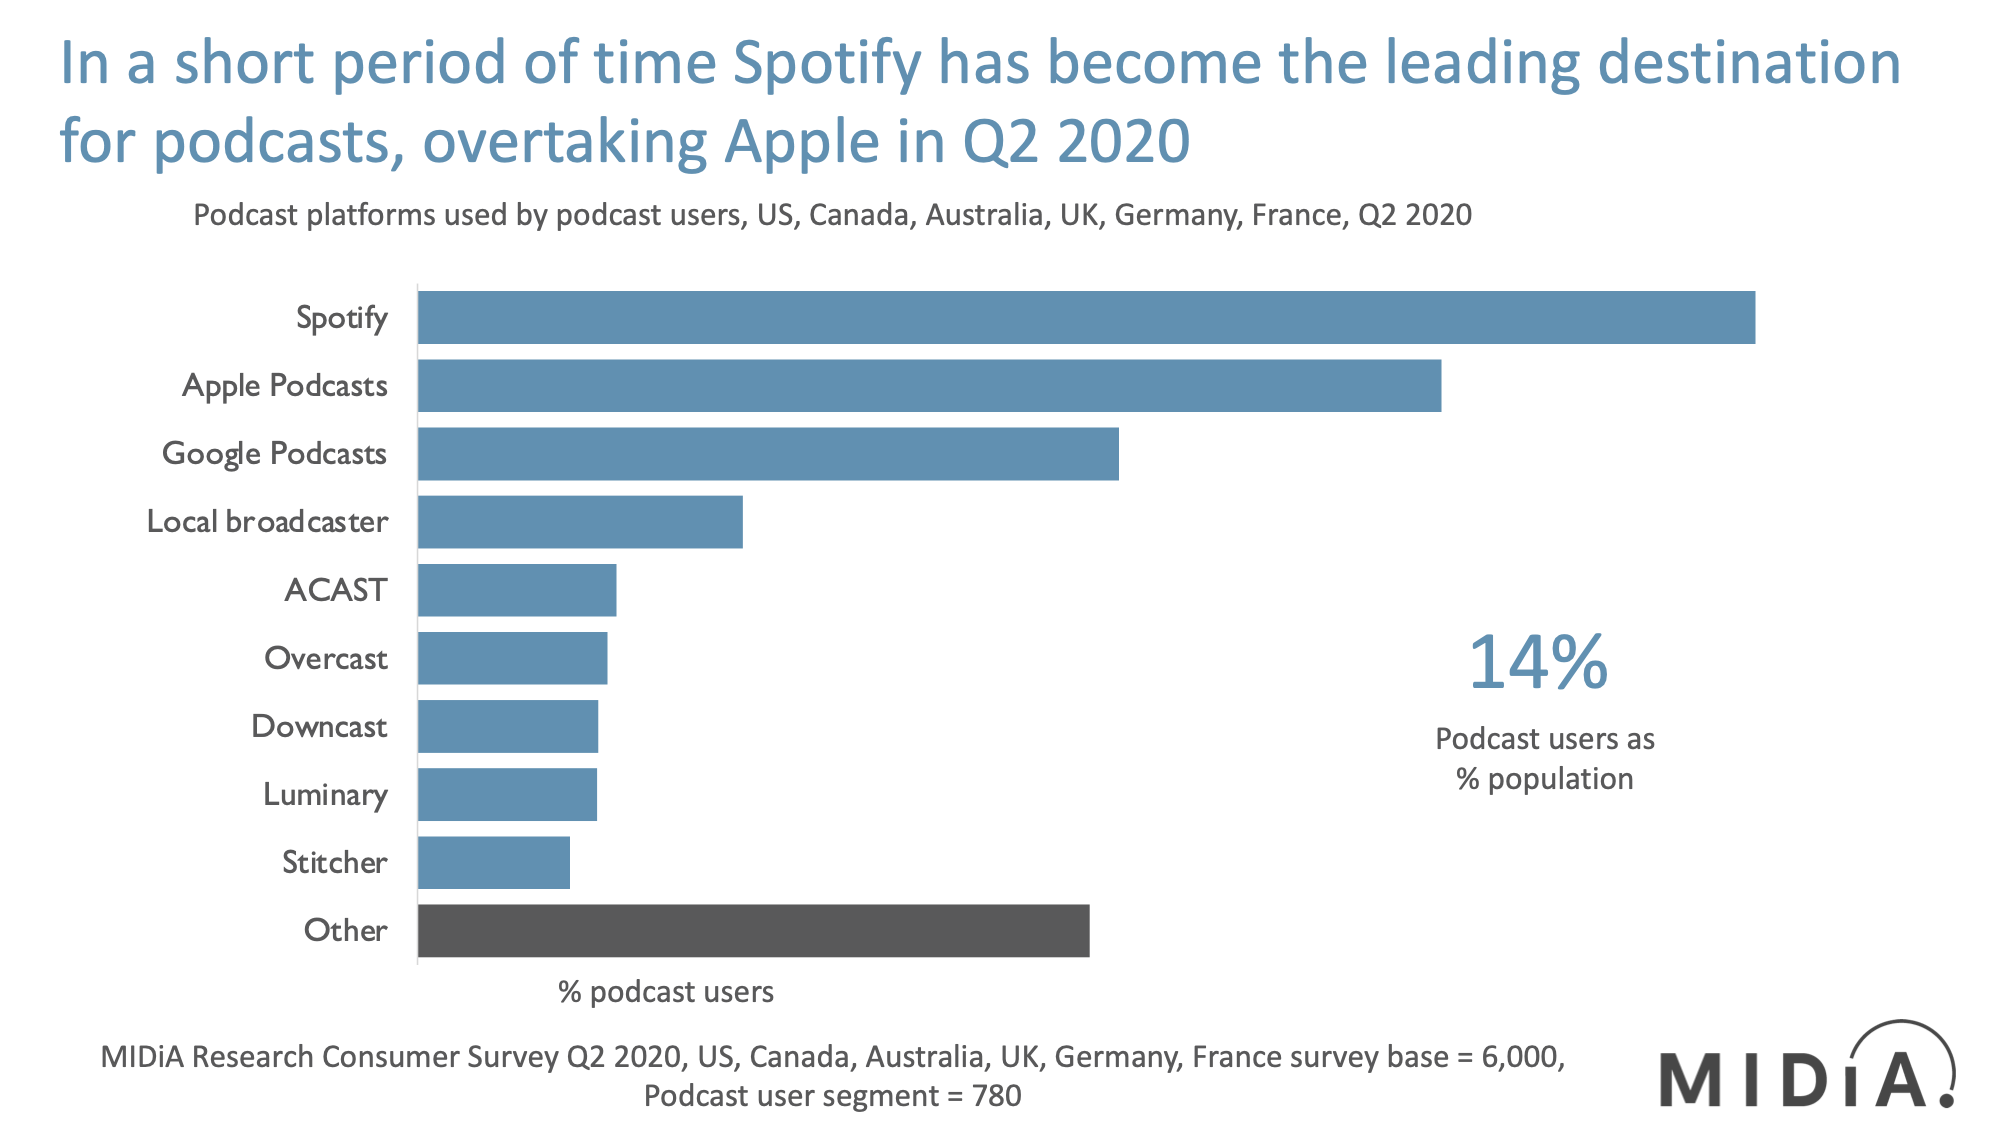 Spotify Podcasts represents 42% of all podcast listeners as of Q2 2020 according to MIDiA